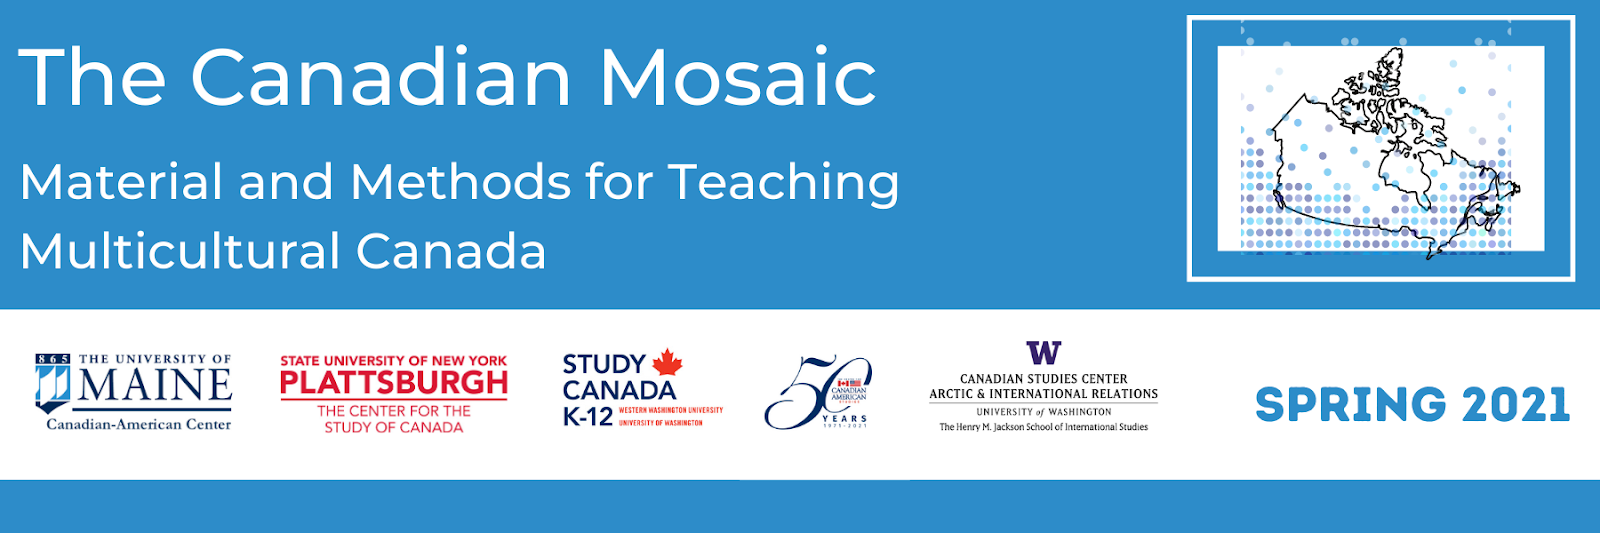 Canadian Mosaic banner with text "Material and Methods for Teaching Multicultural Canada" and logos for various institutes